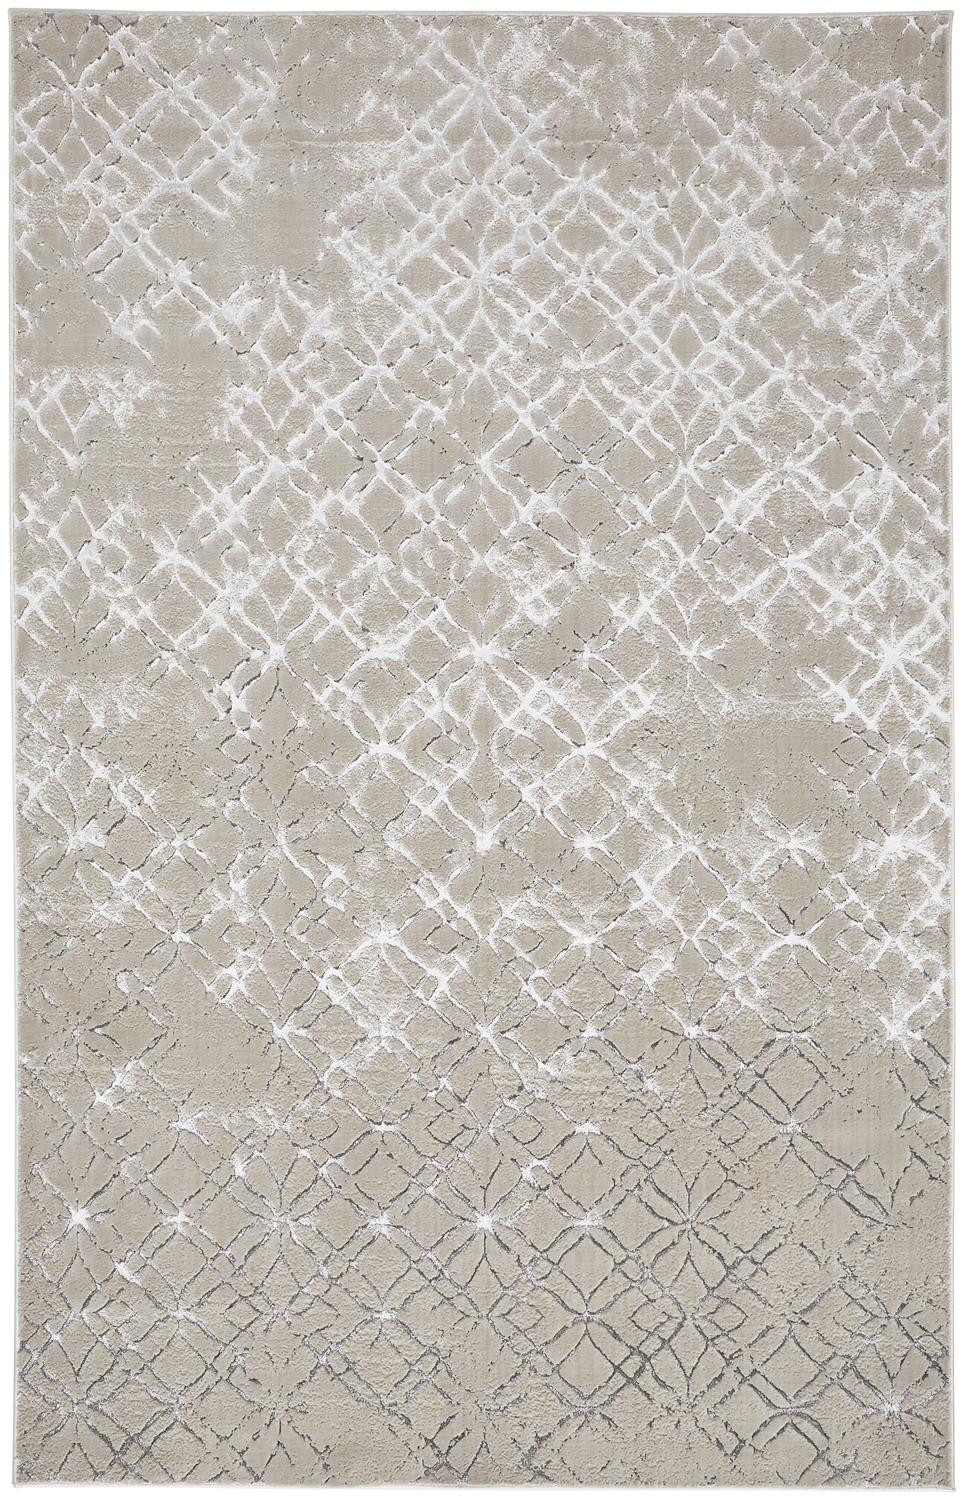 10' X 13' Silver Gray And White Abstract Stain Resistant Area Rug-511500-1